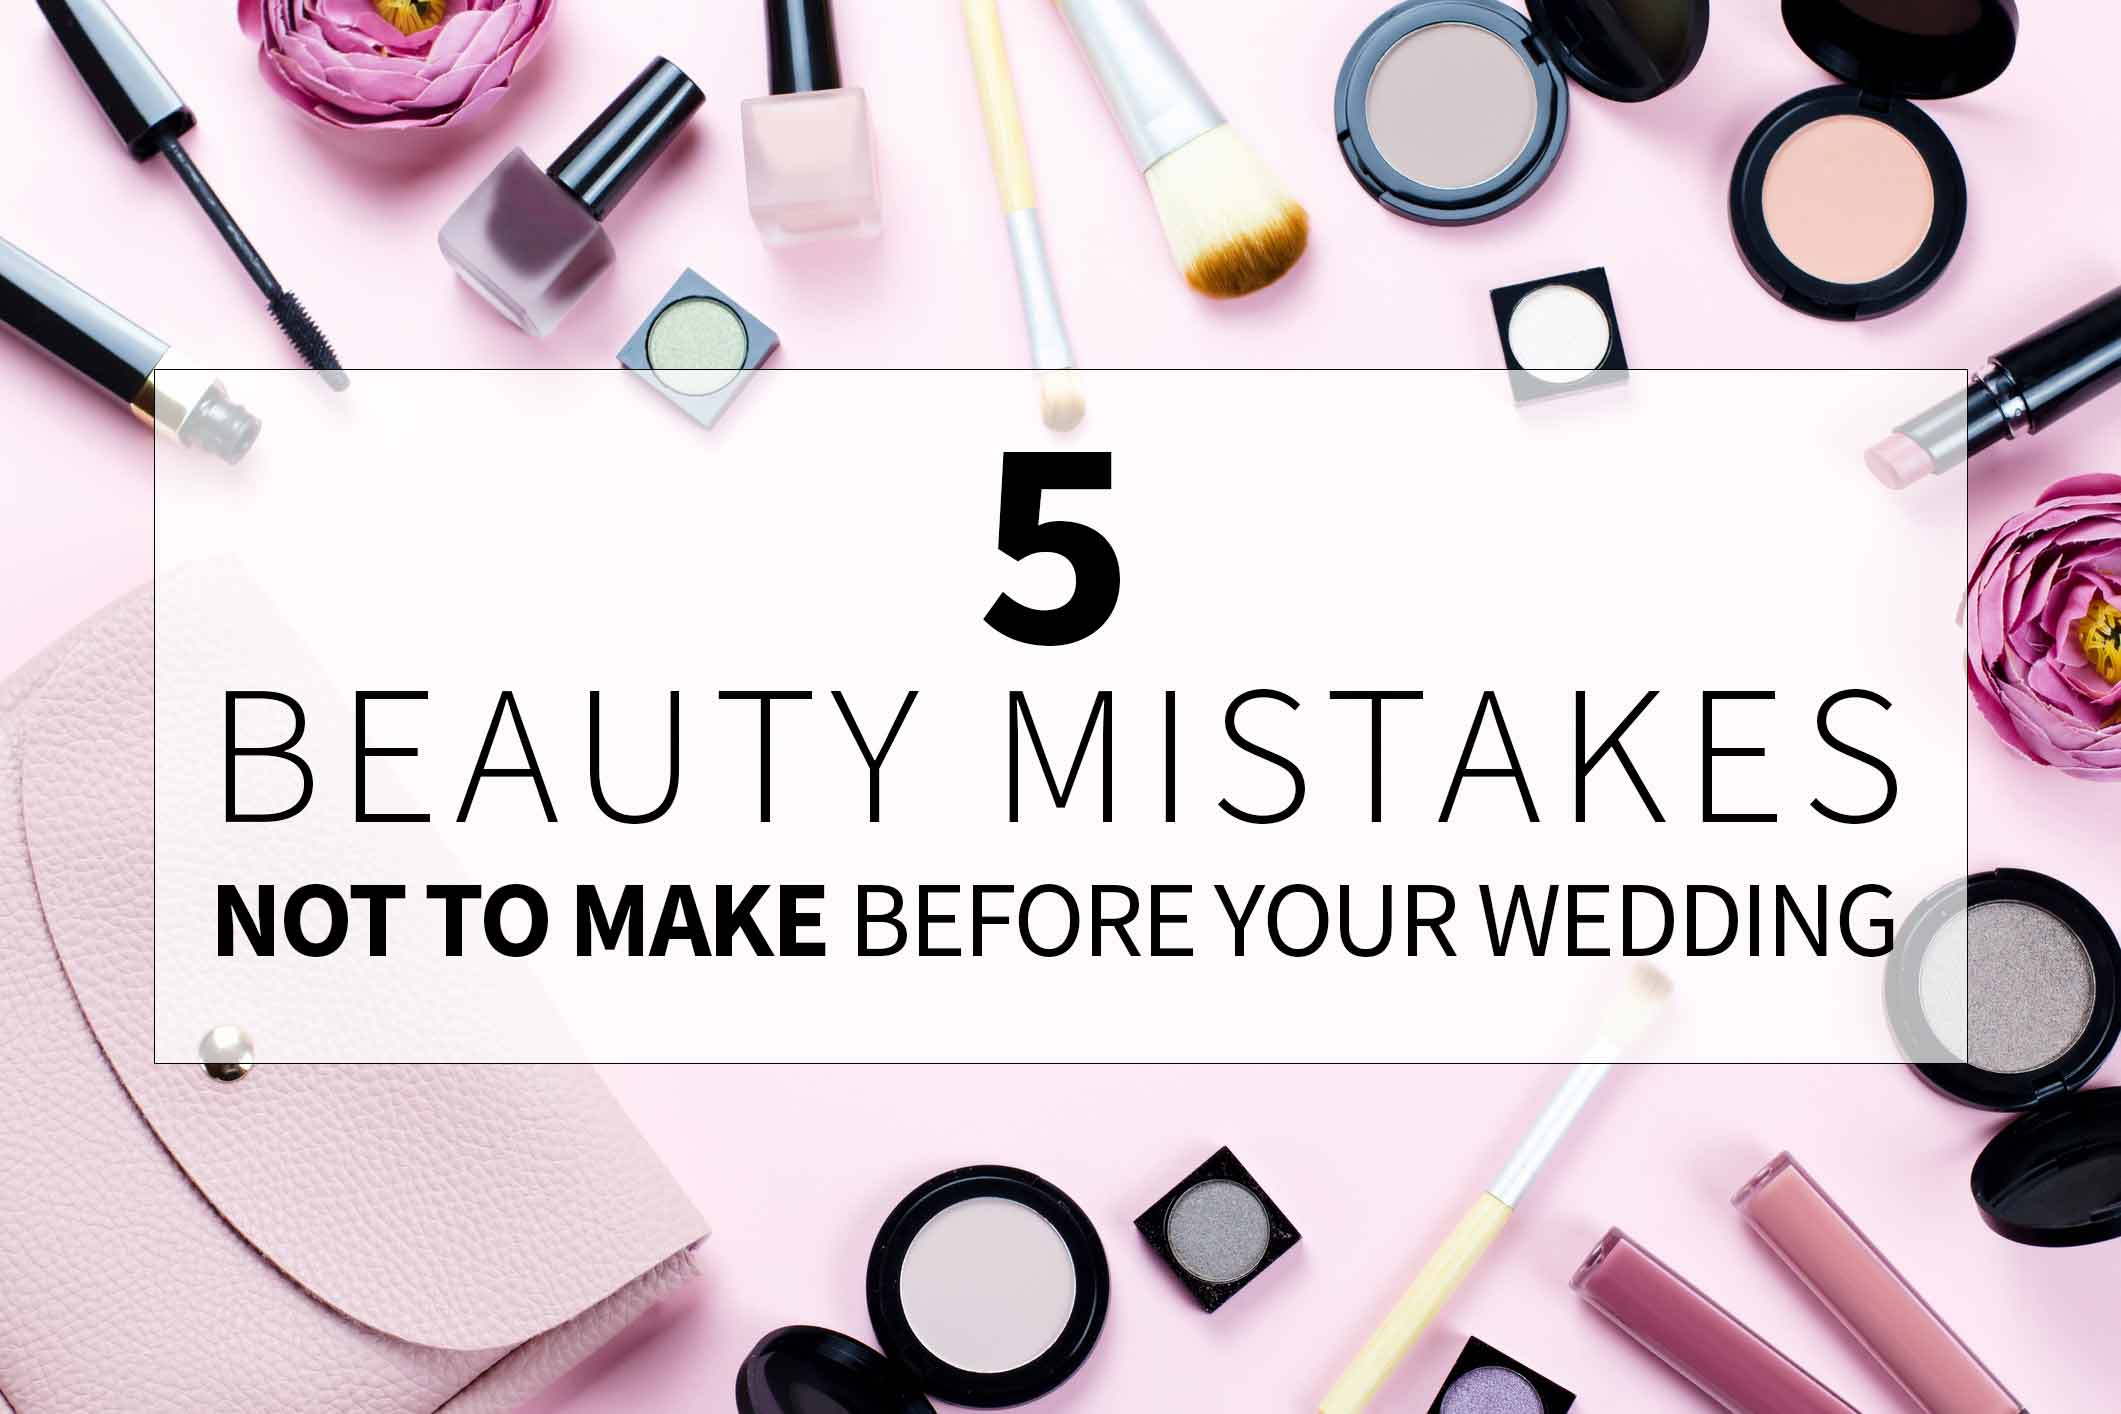 5 Beauty Mistakes to Not Make Before Your Wedding